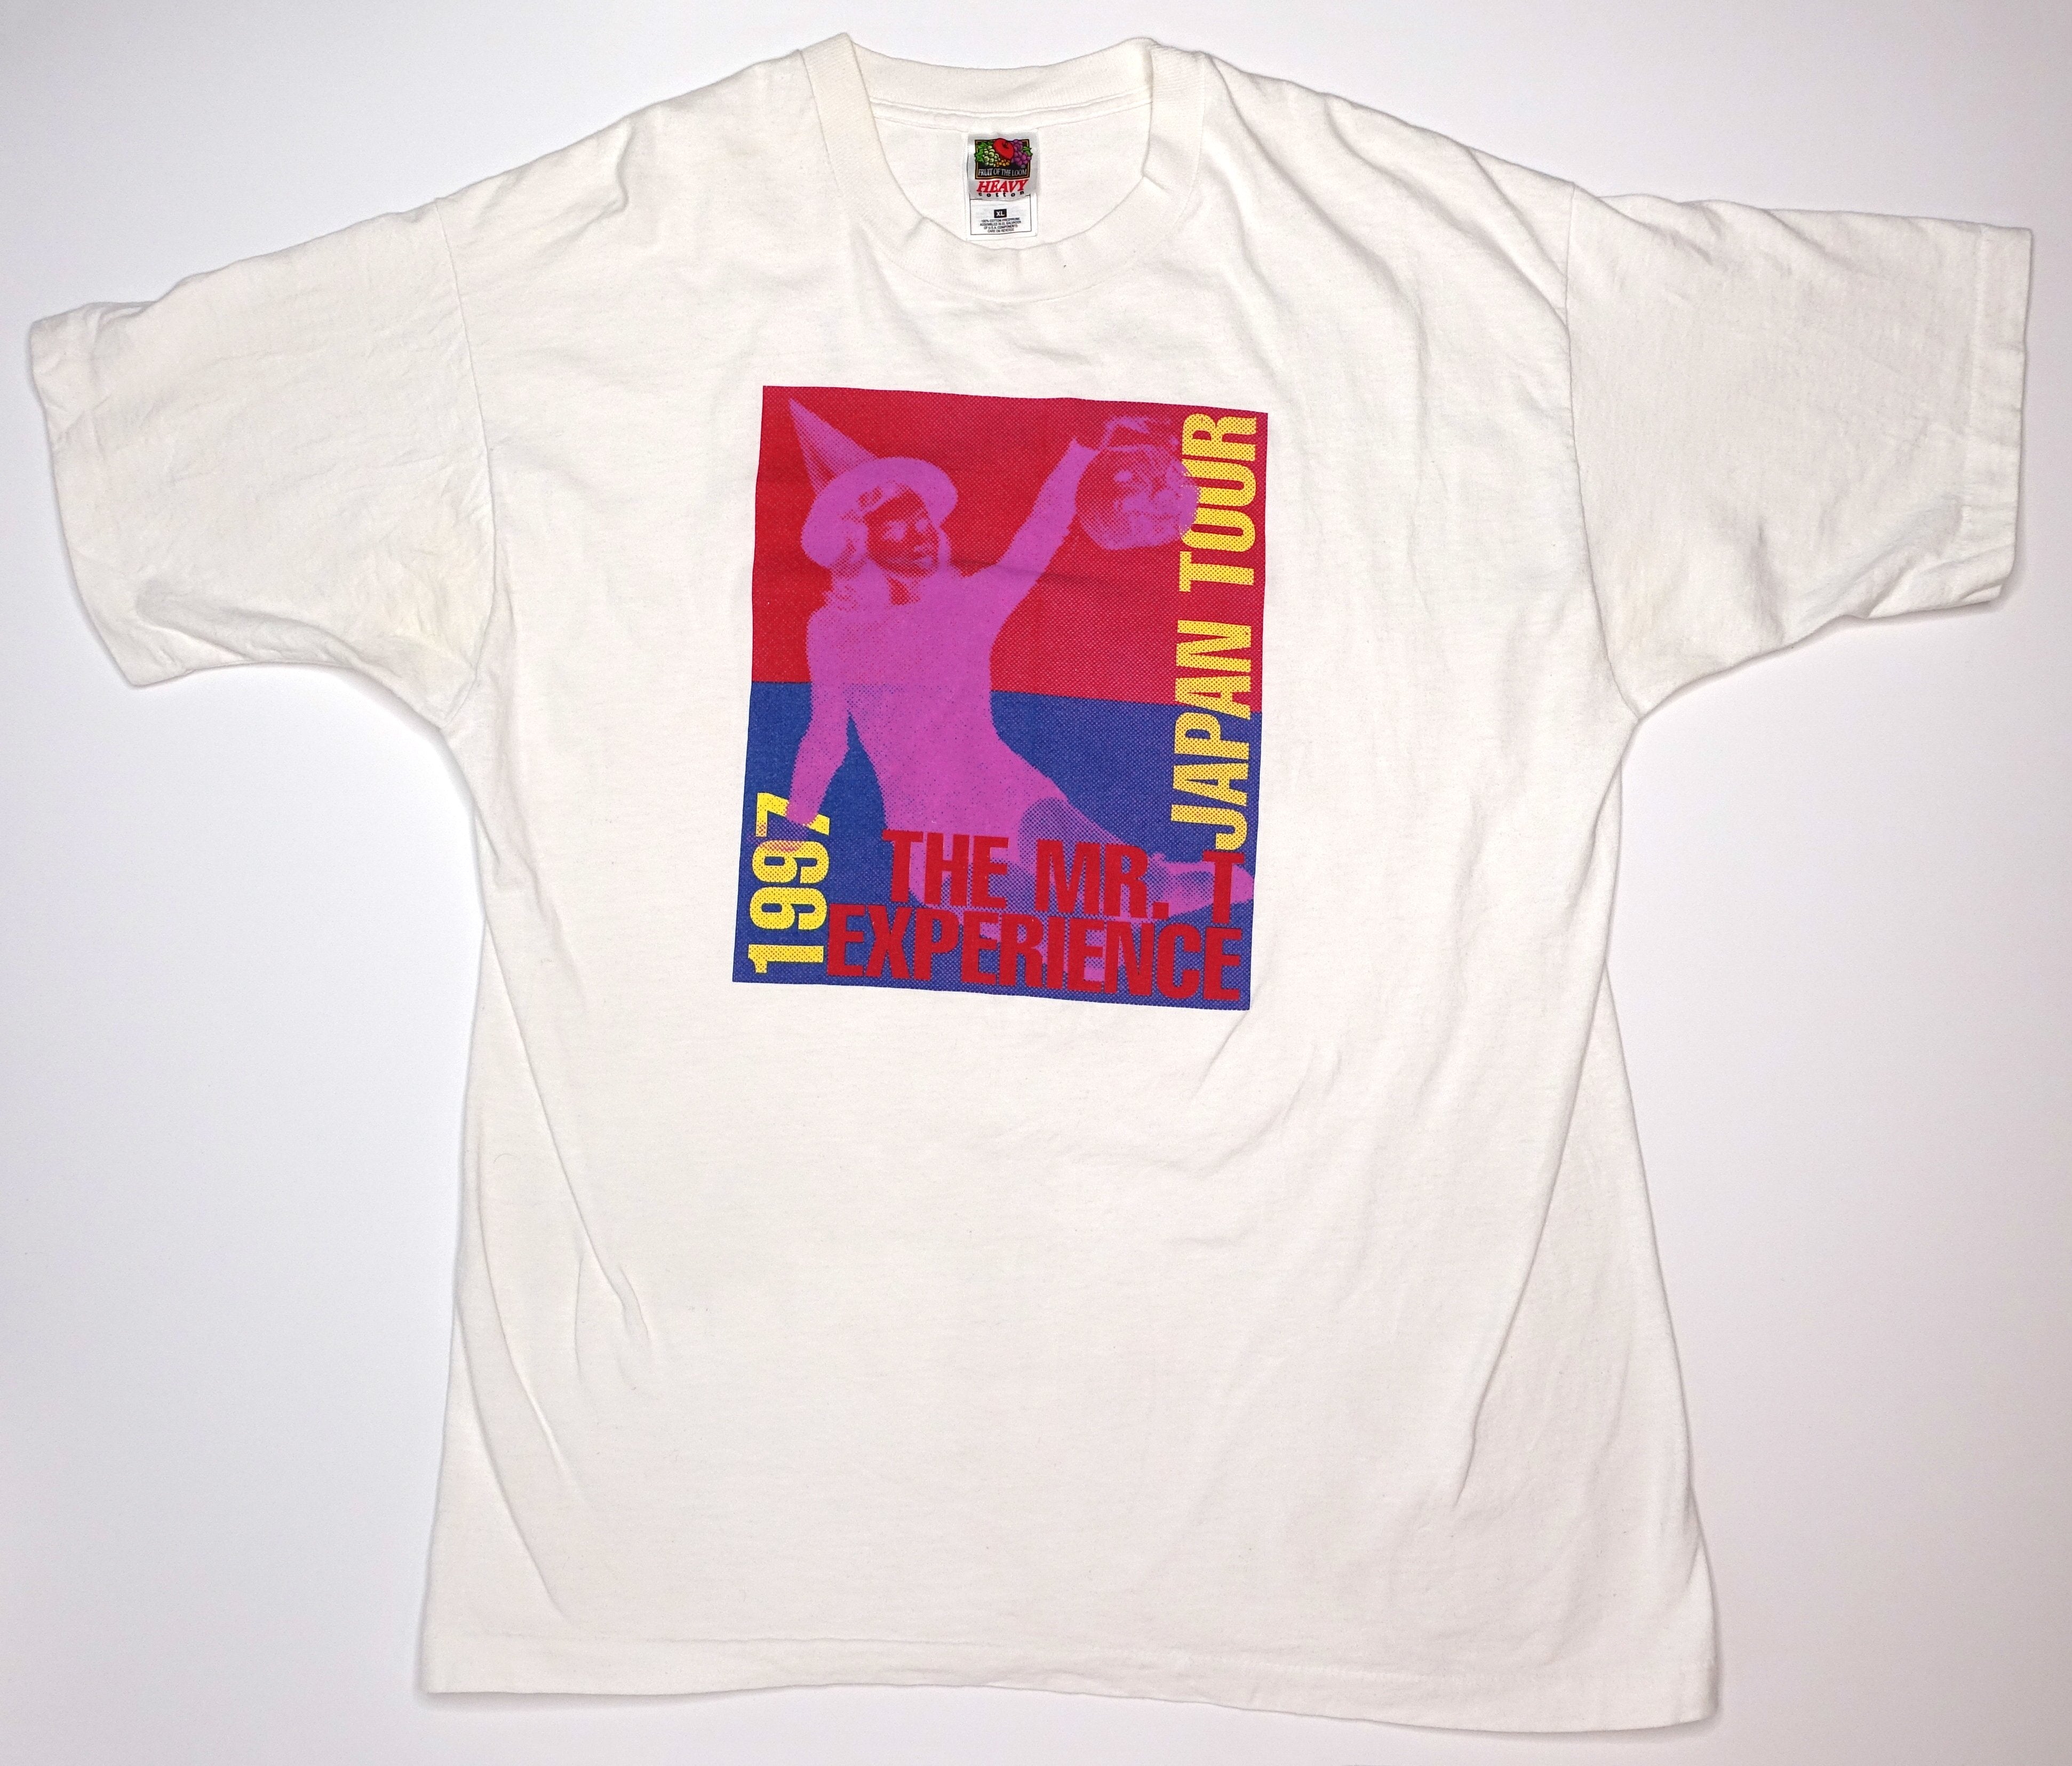 Mr. T Experience ‎– Revenge Is Sweet, And So Are You Japan Tour 1997 Shirt Size XL